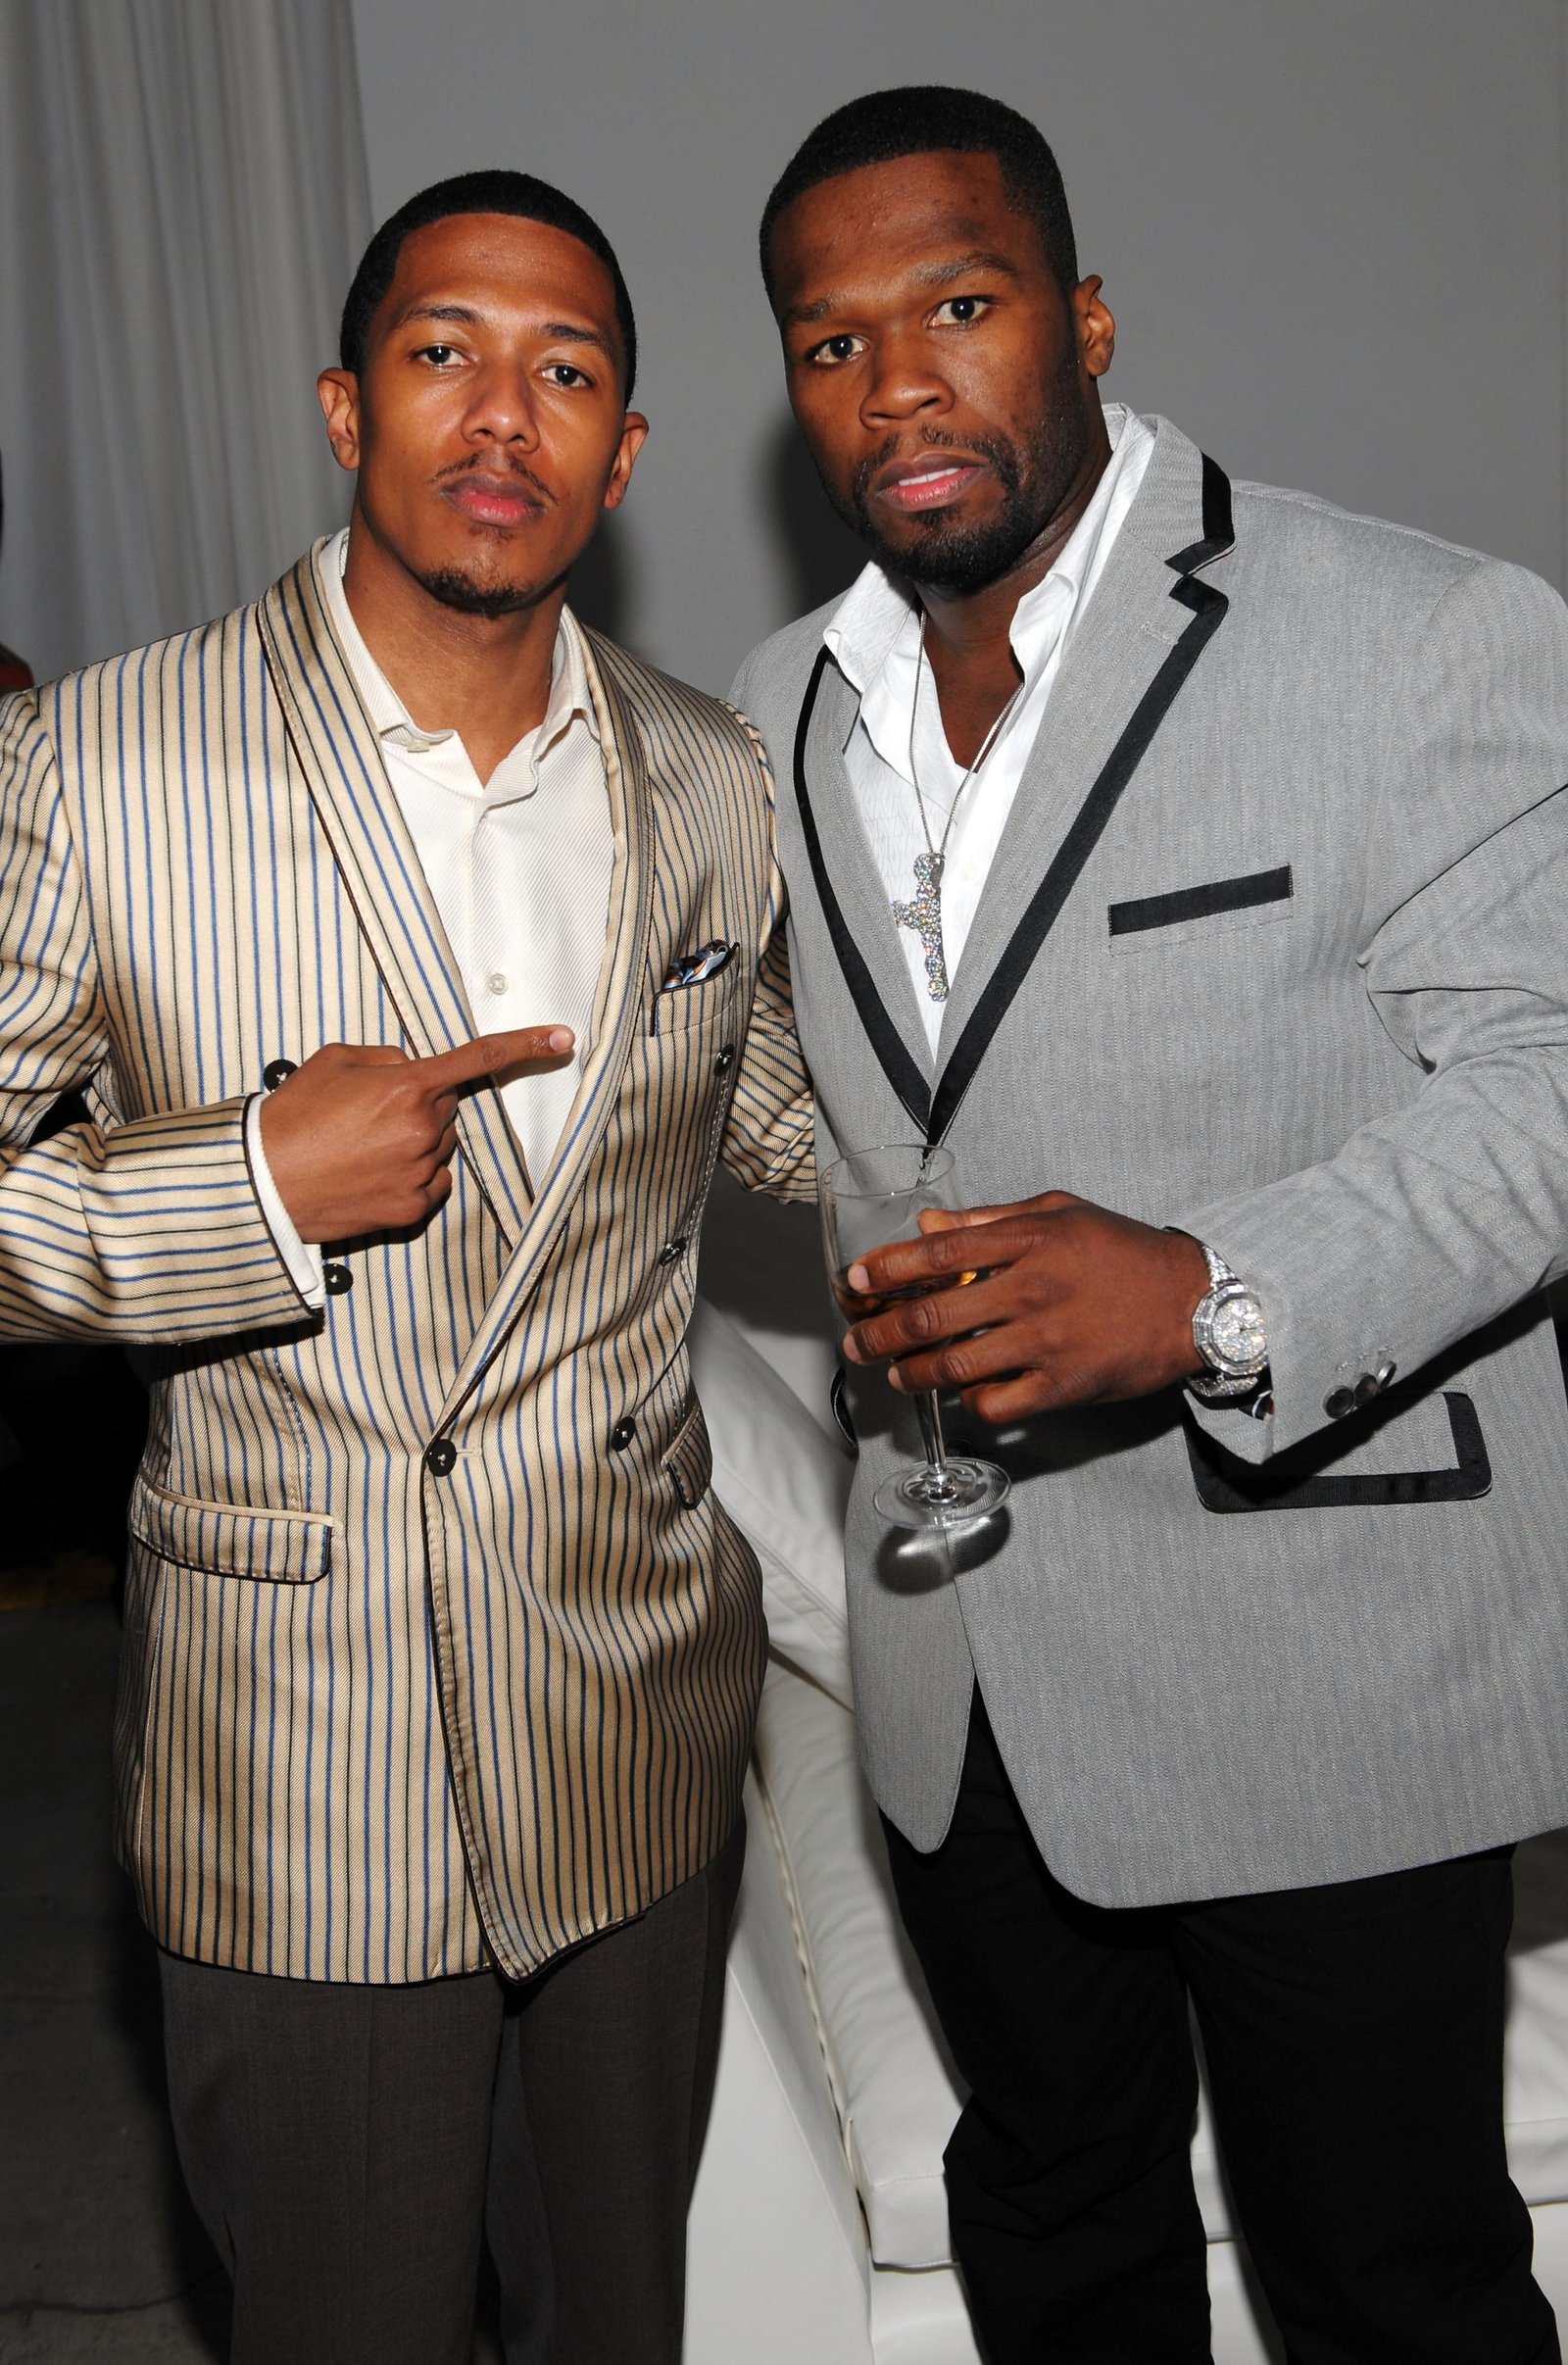 Actor Nick Cannon and rapper 50 Cent